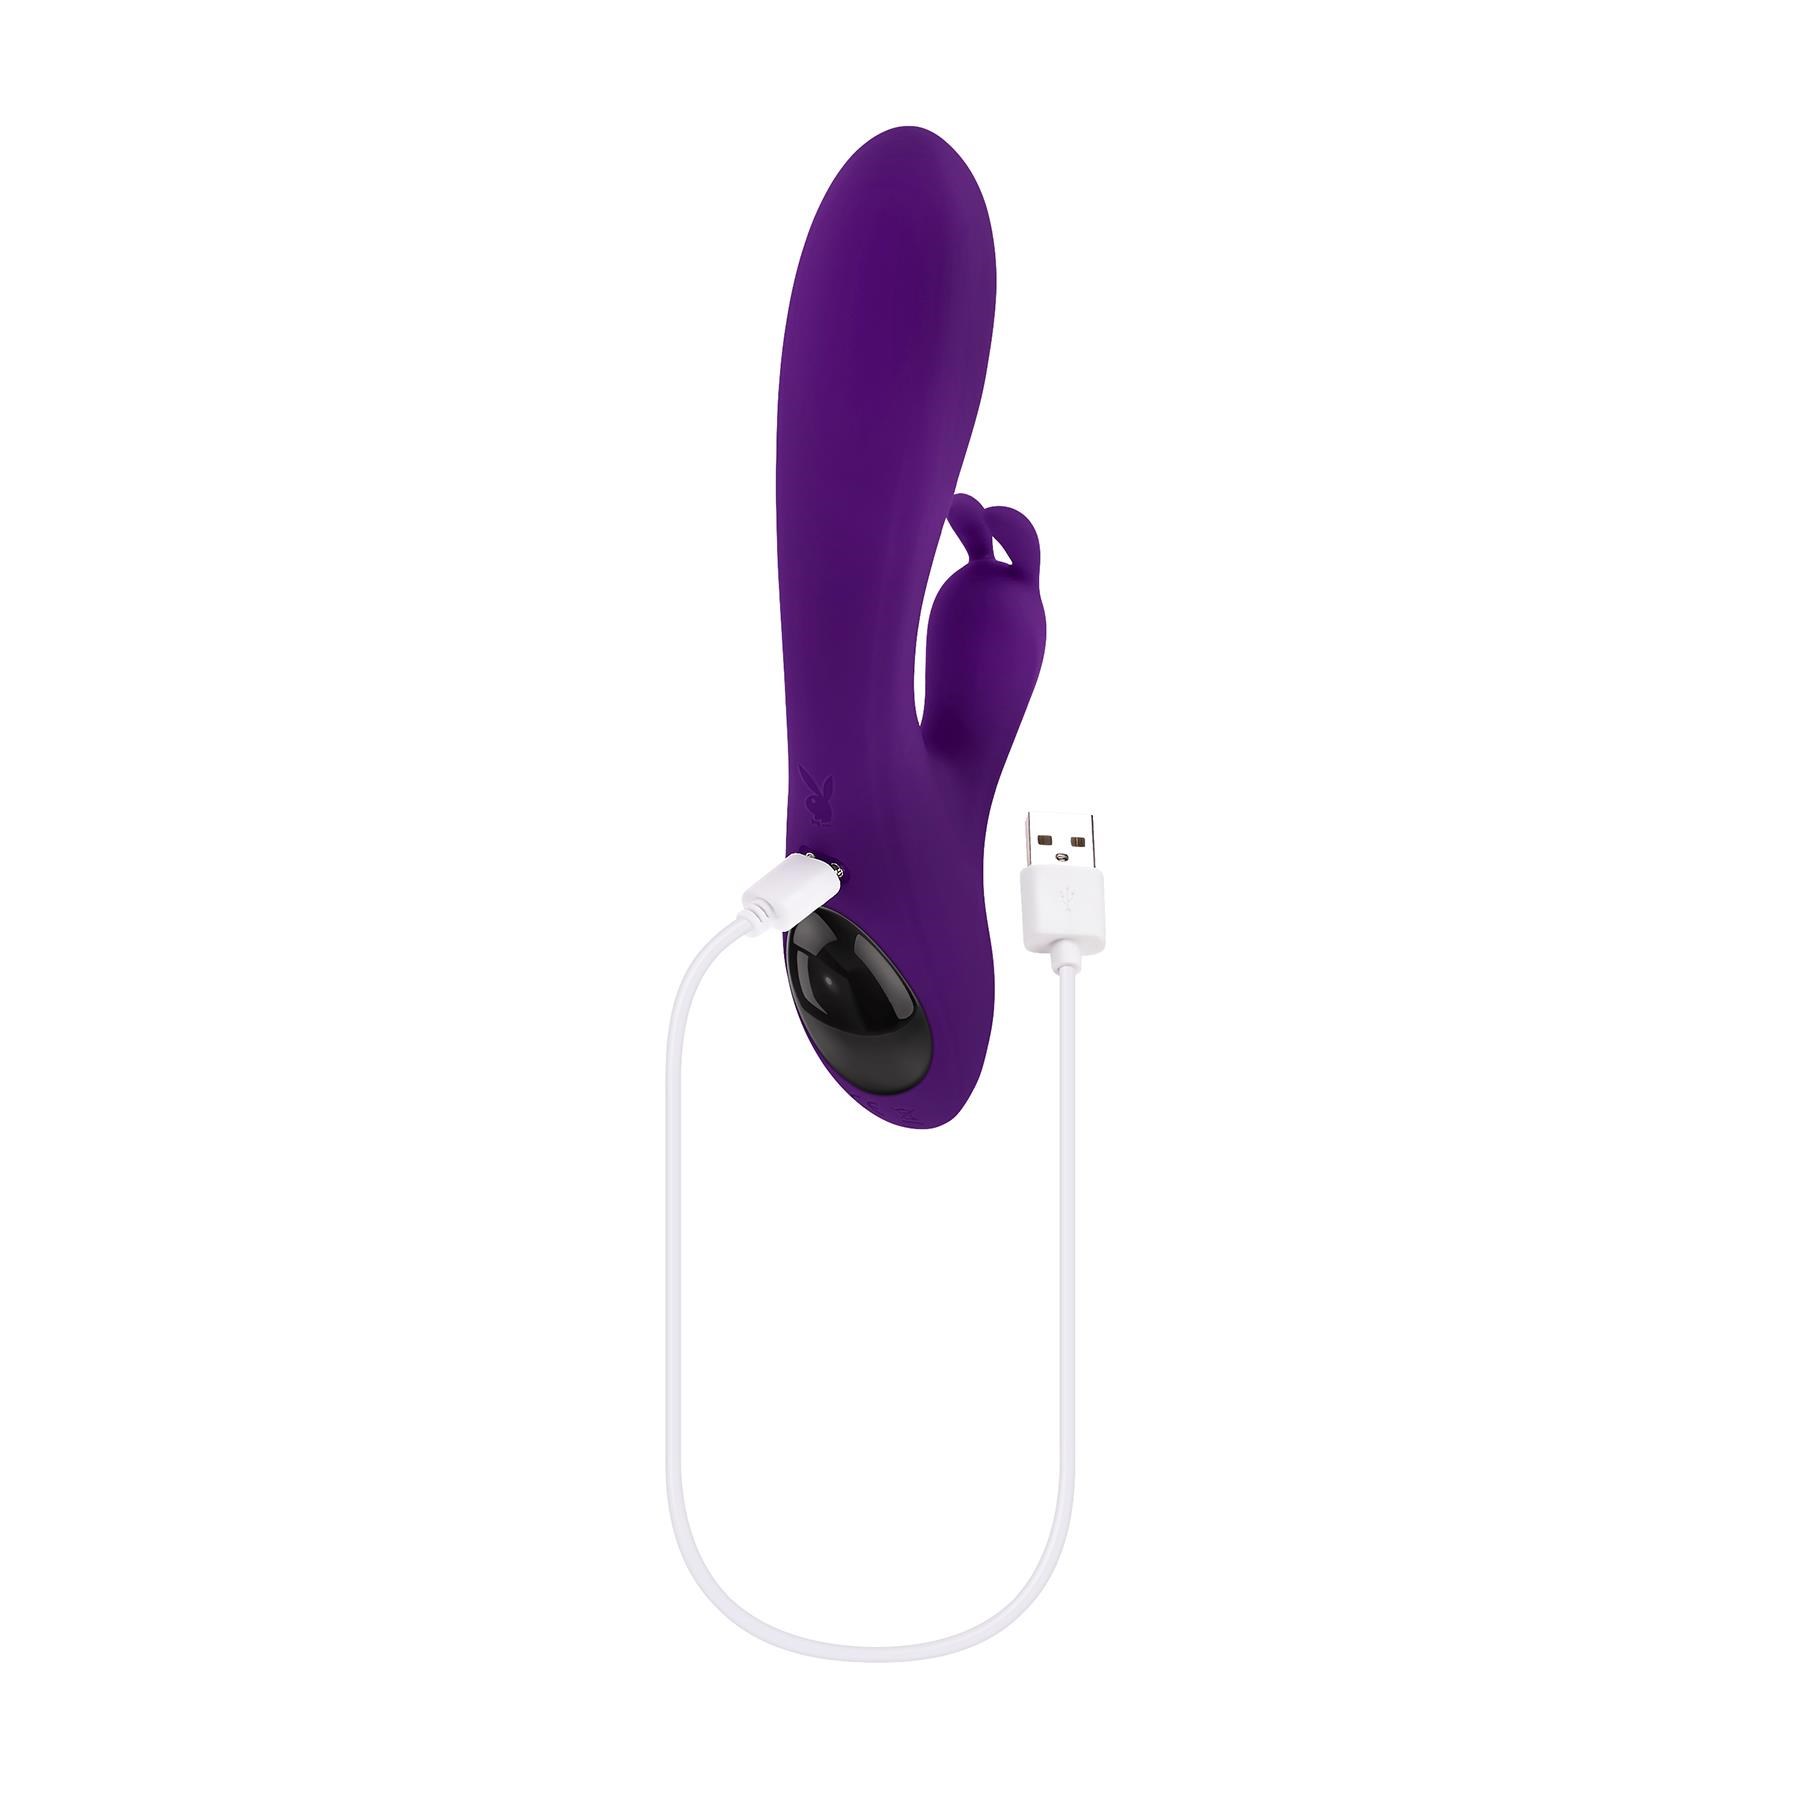 Playboy Pleasure On Repeat Rabbit Vibrator - Product Shot With Charging Cable